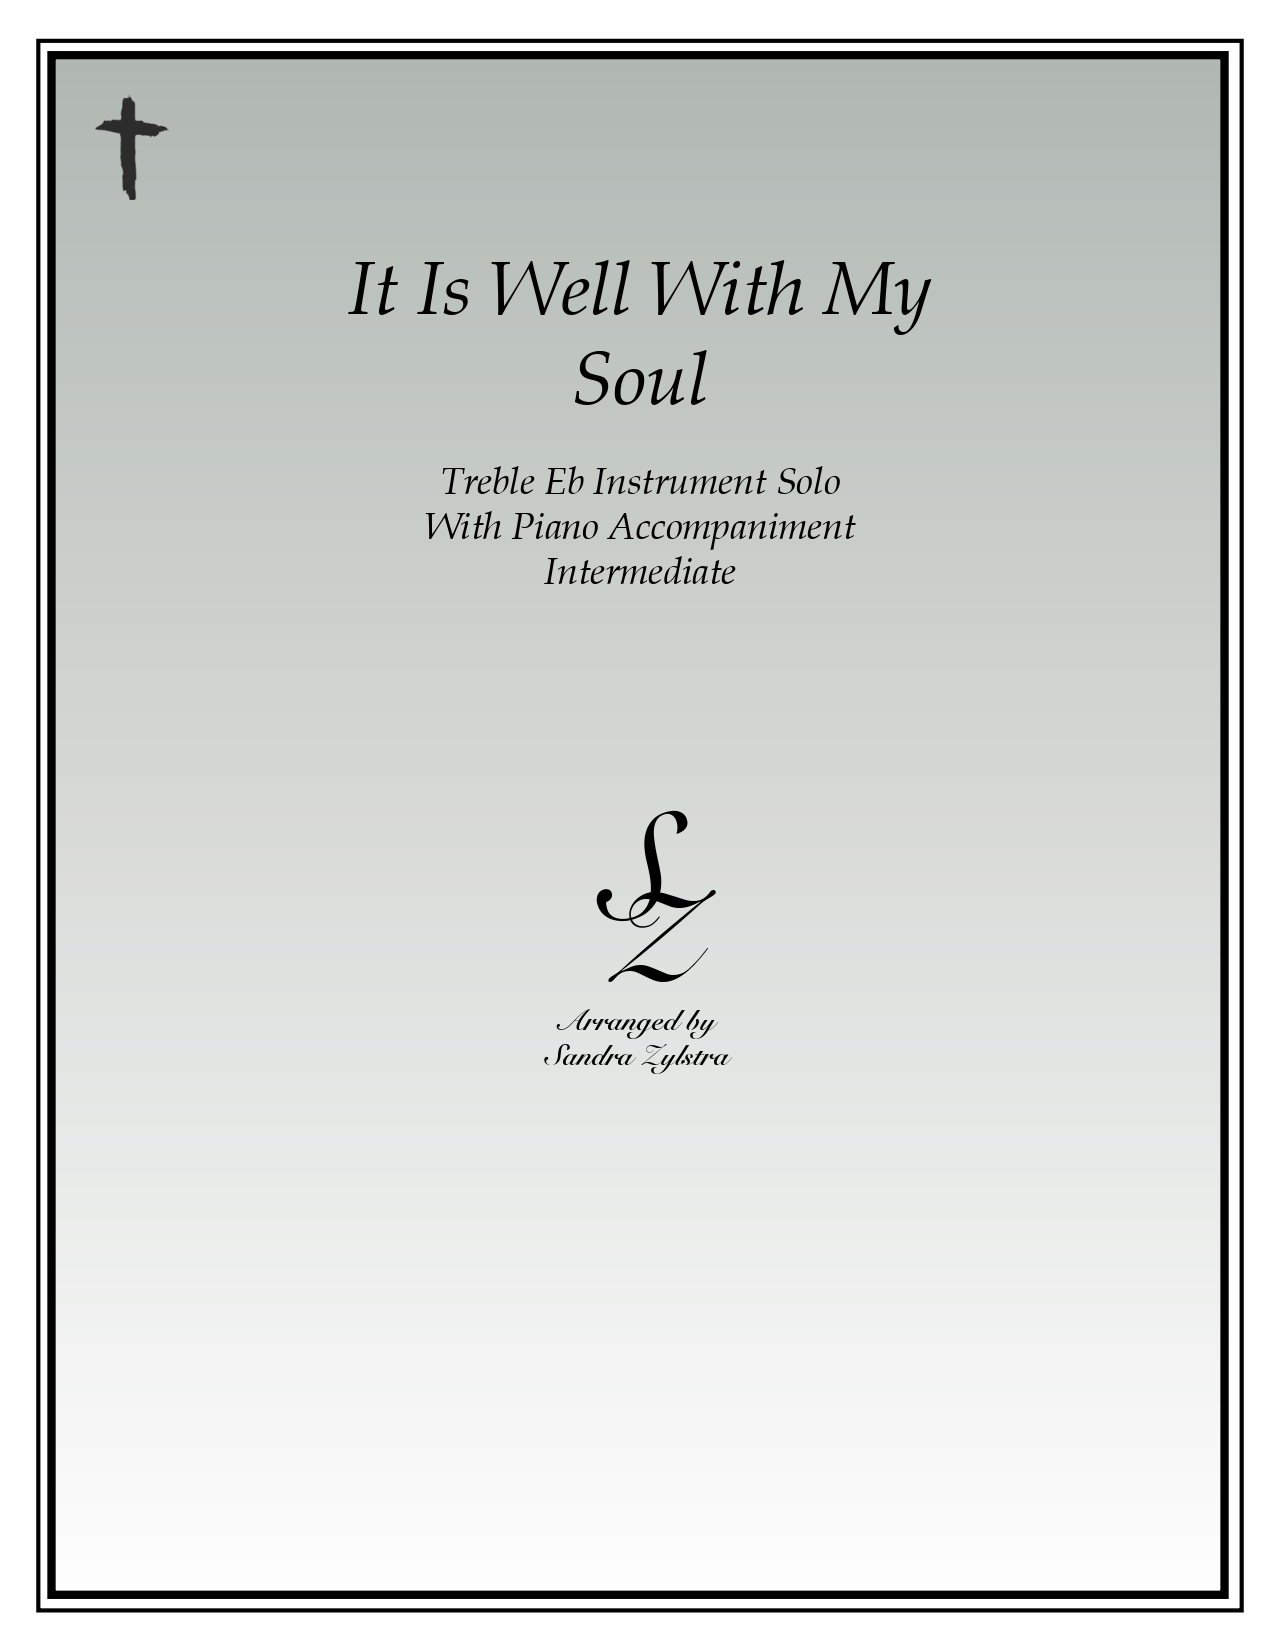 It Is Well With My Soul Eb instrument solo part cover page 00011 1